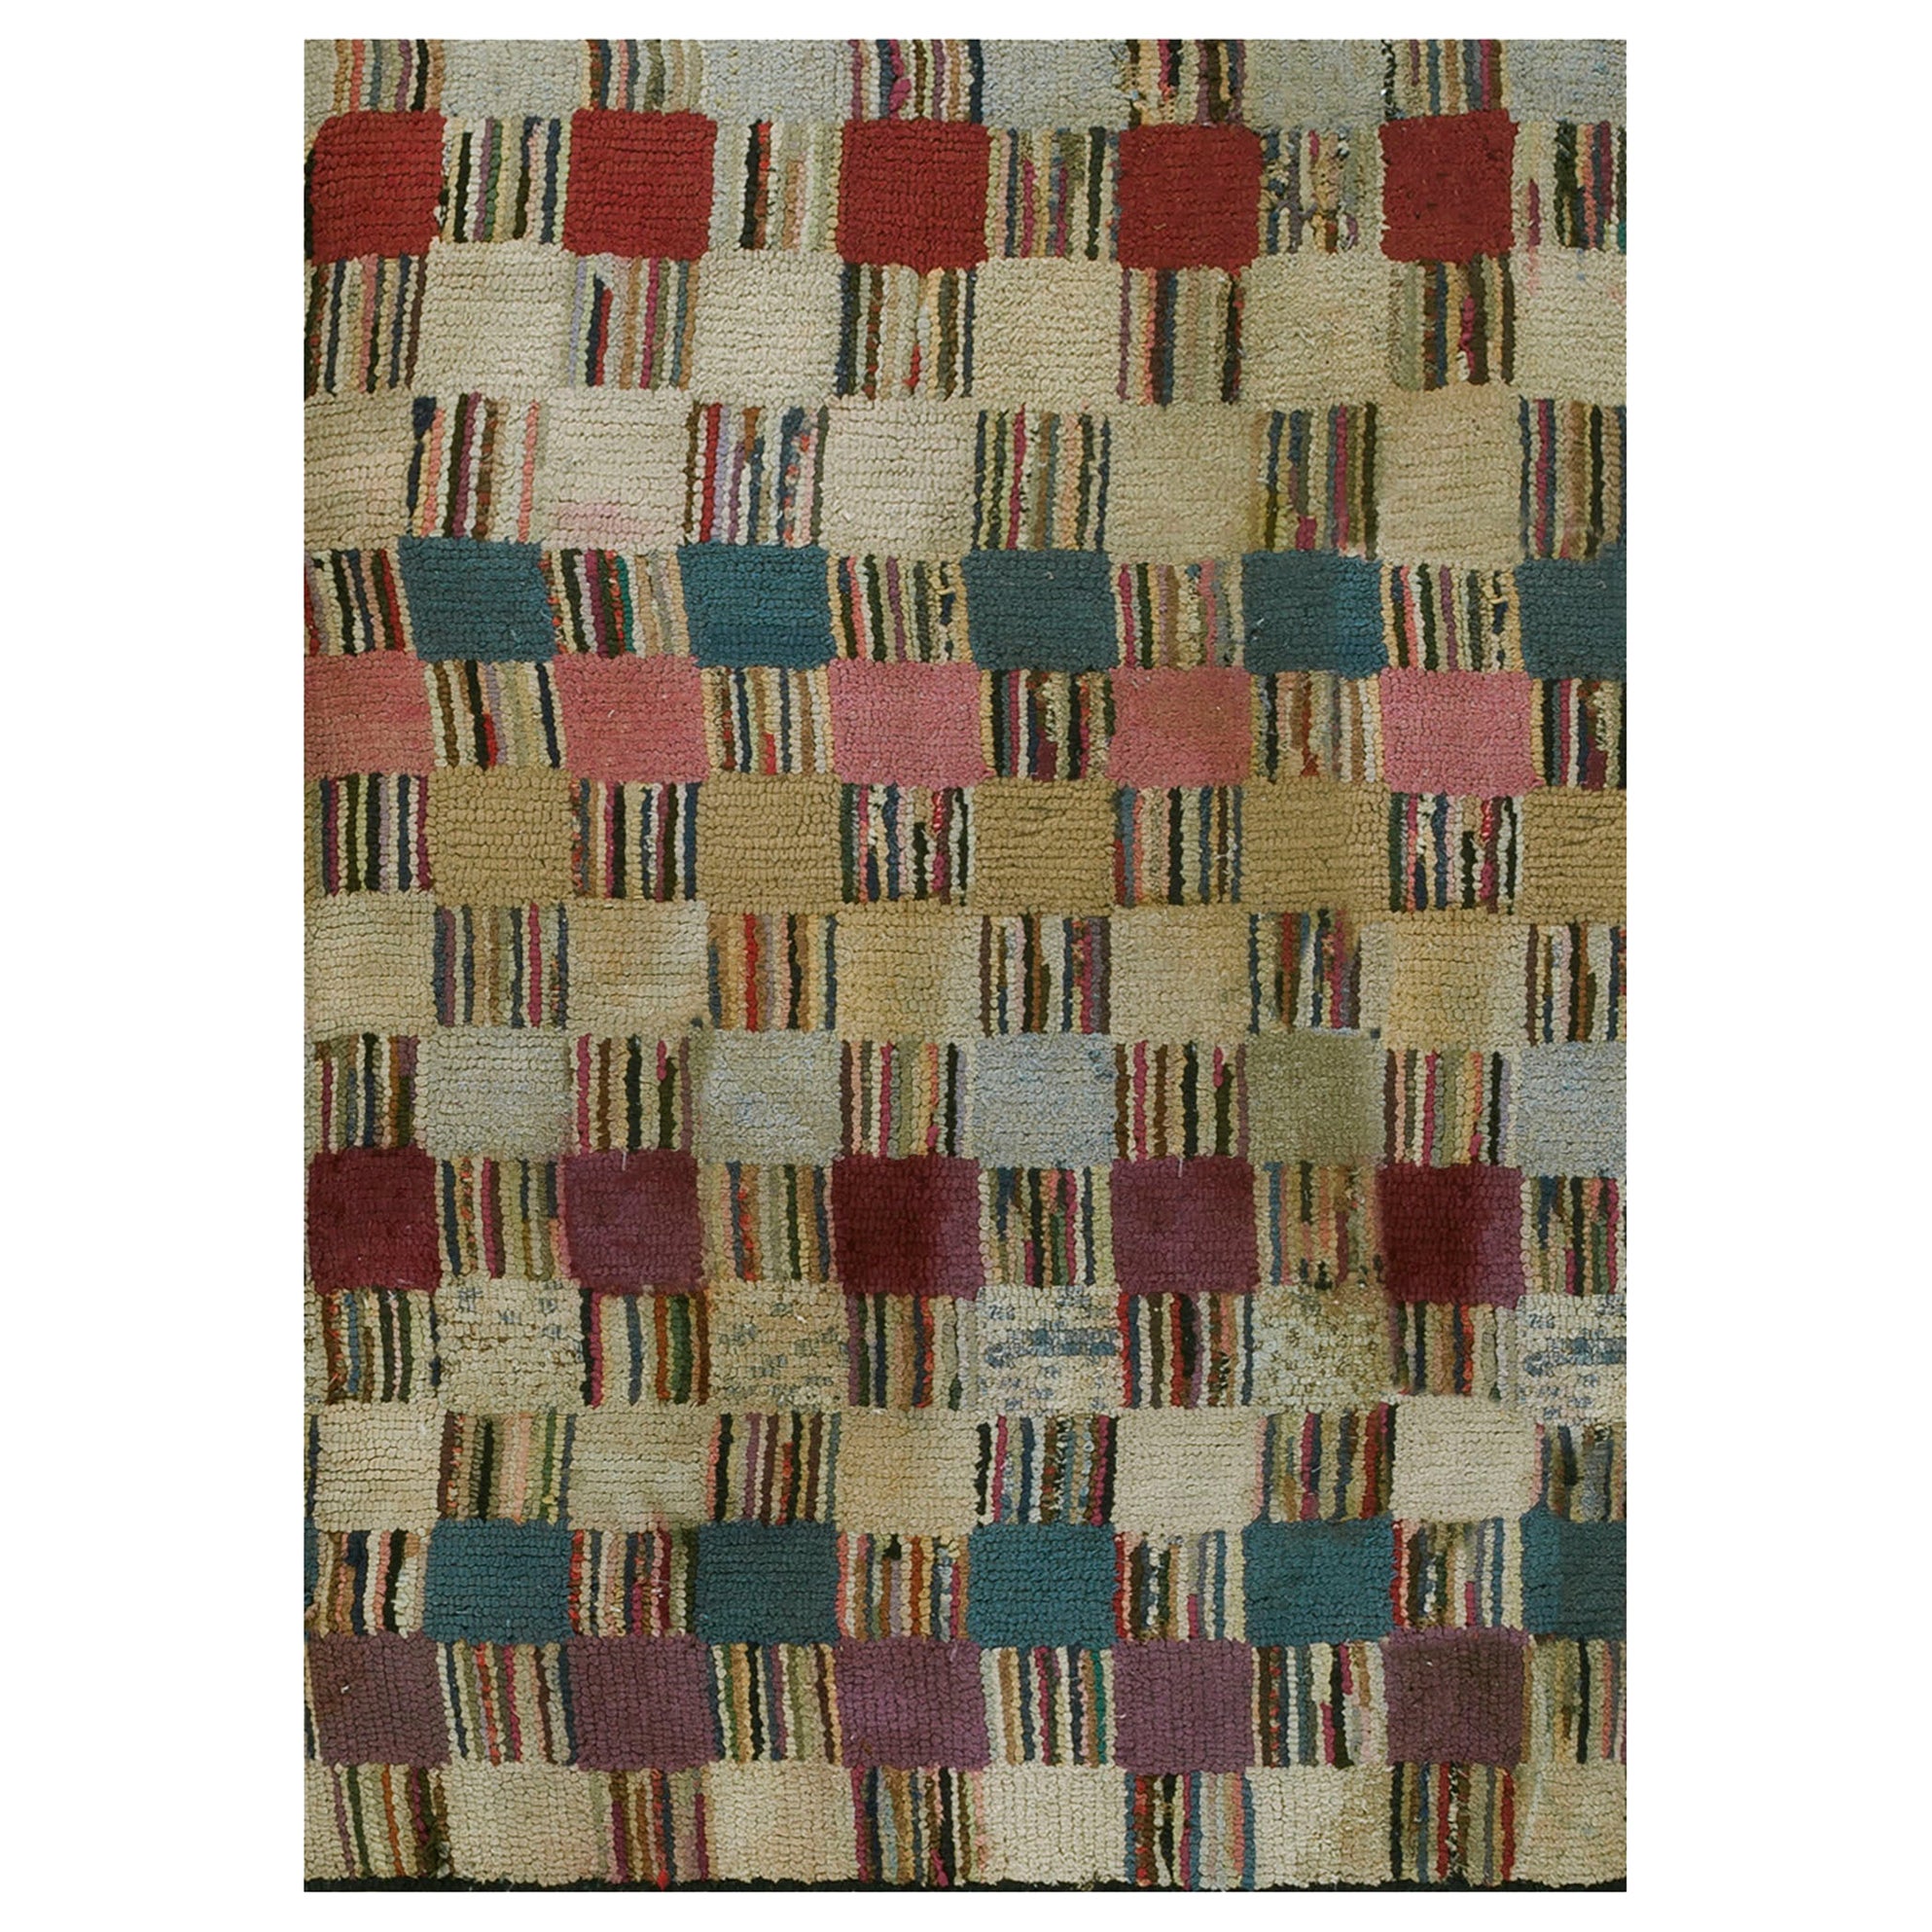 Antique American Hooked Rug 3'3" x 3'6" For Sale